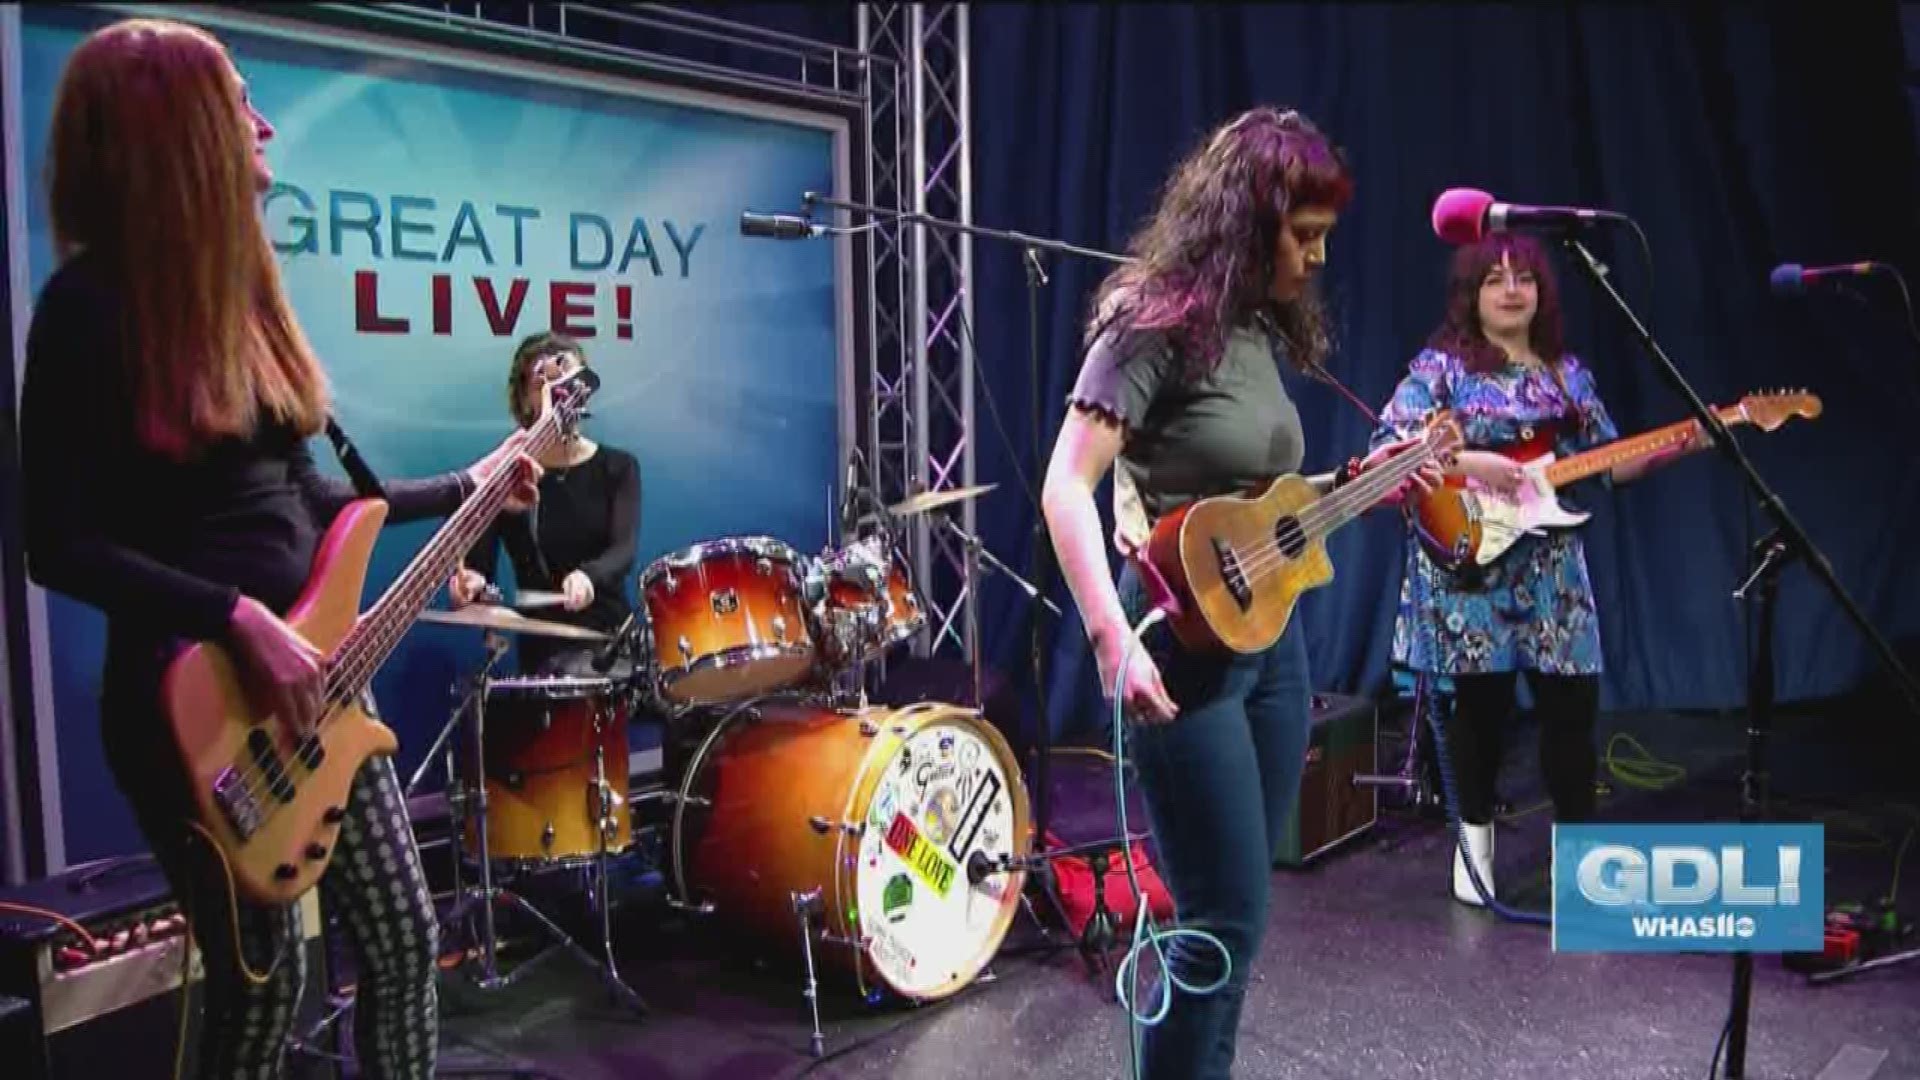 Bungalow Betty stopped by Great Day Live to perform a couple of their songs.